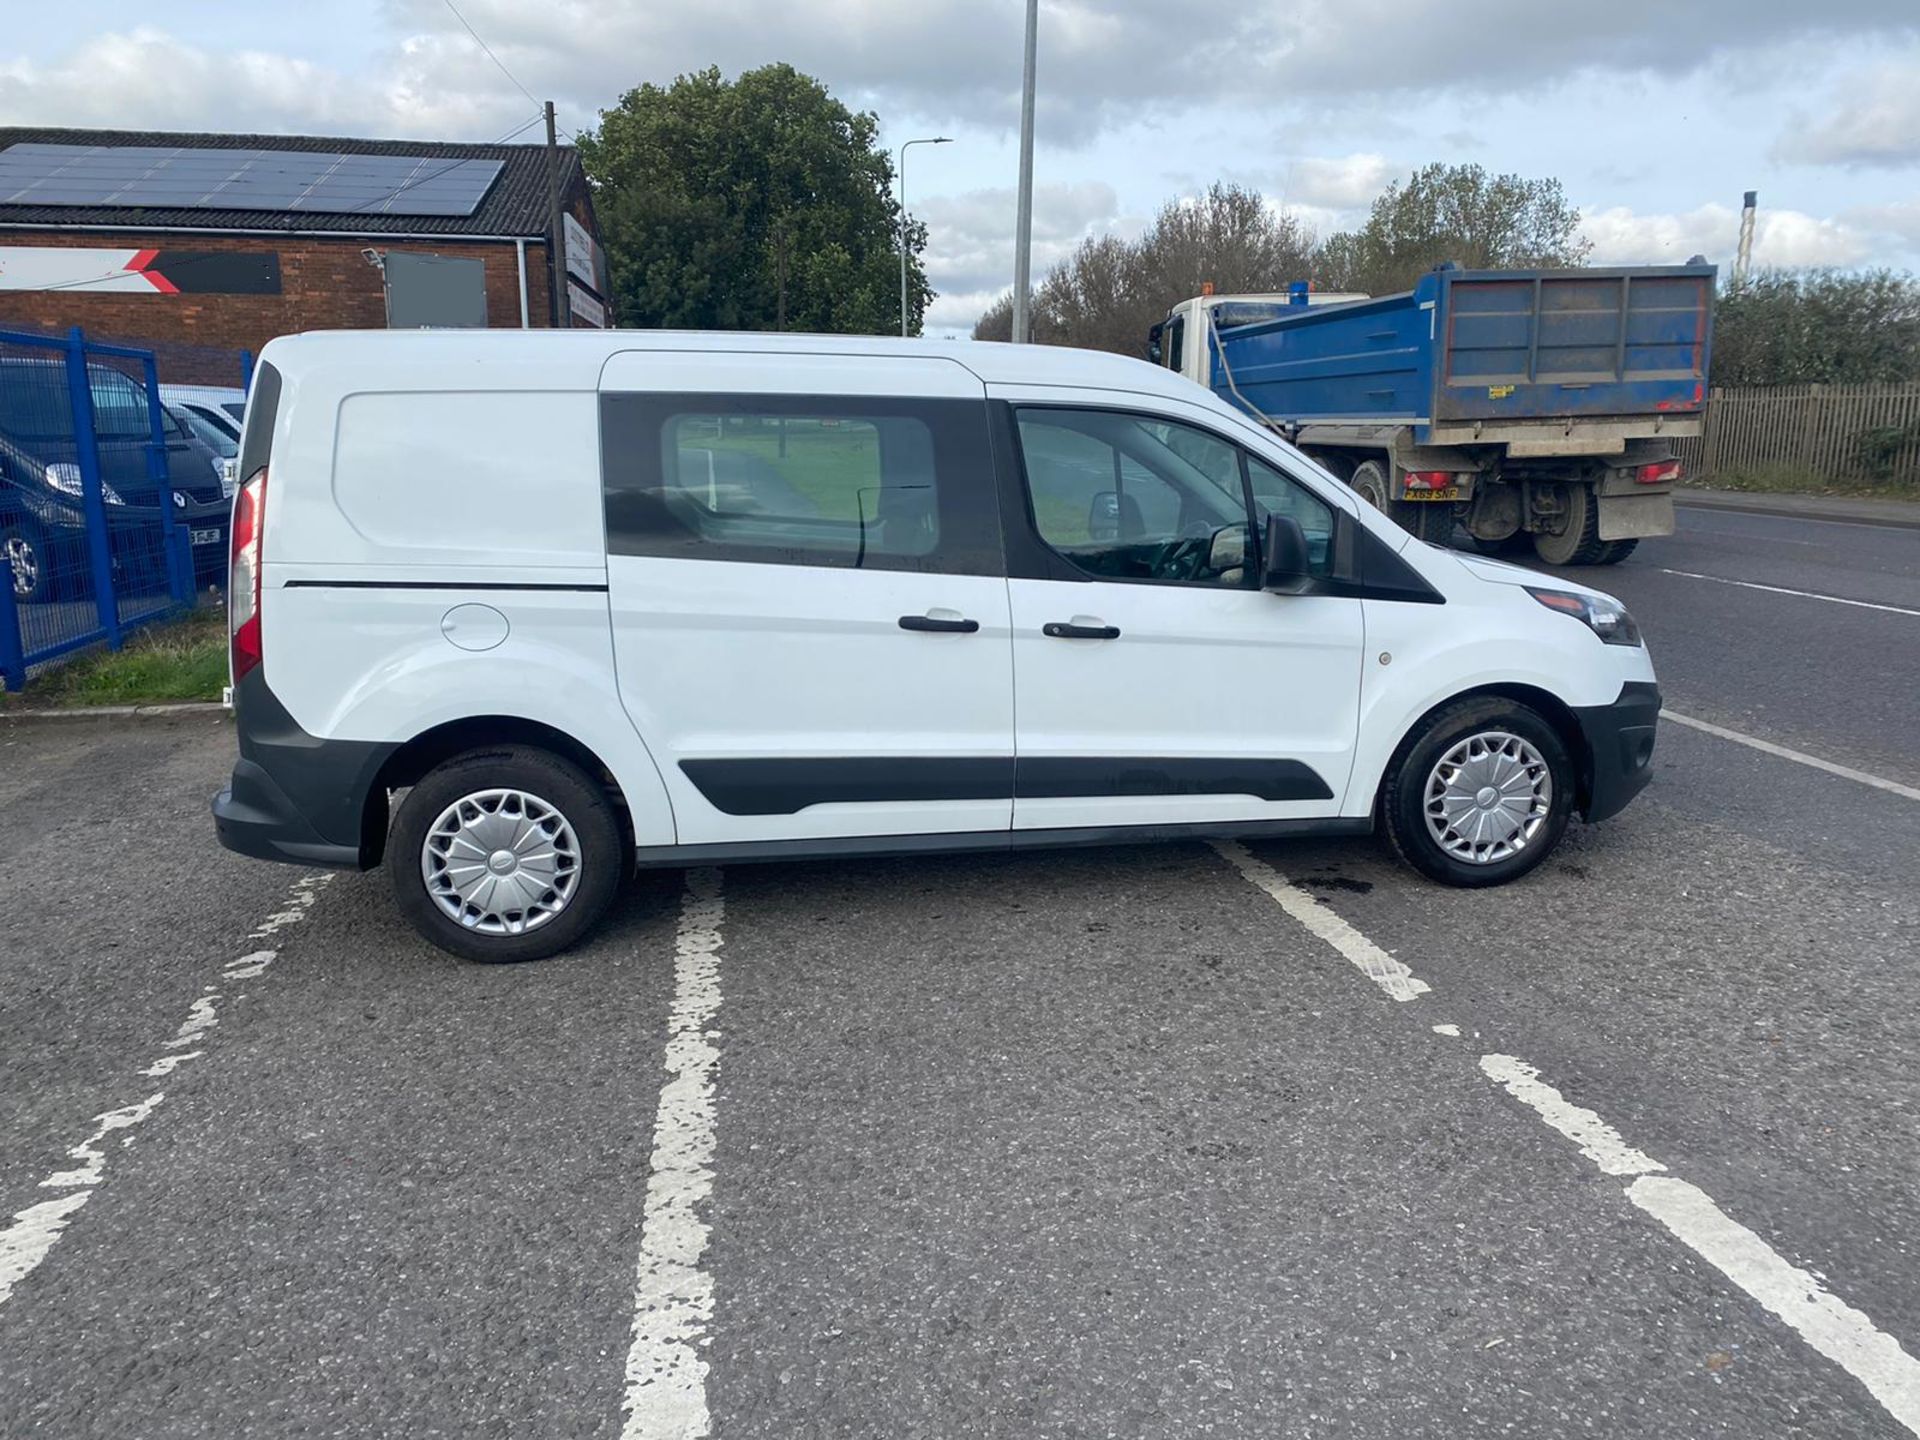 2017 17 FORD TRANSIT CONNECT DOUBLE CAB PANEL VAN - 118K MILES - 5 SEATS - LWB - EURO 6. - Image 8 of 11